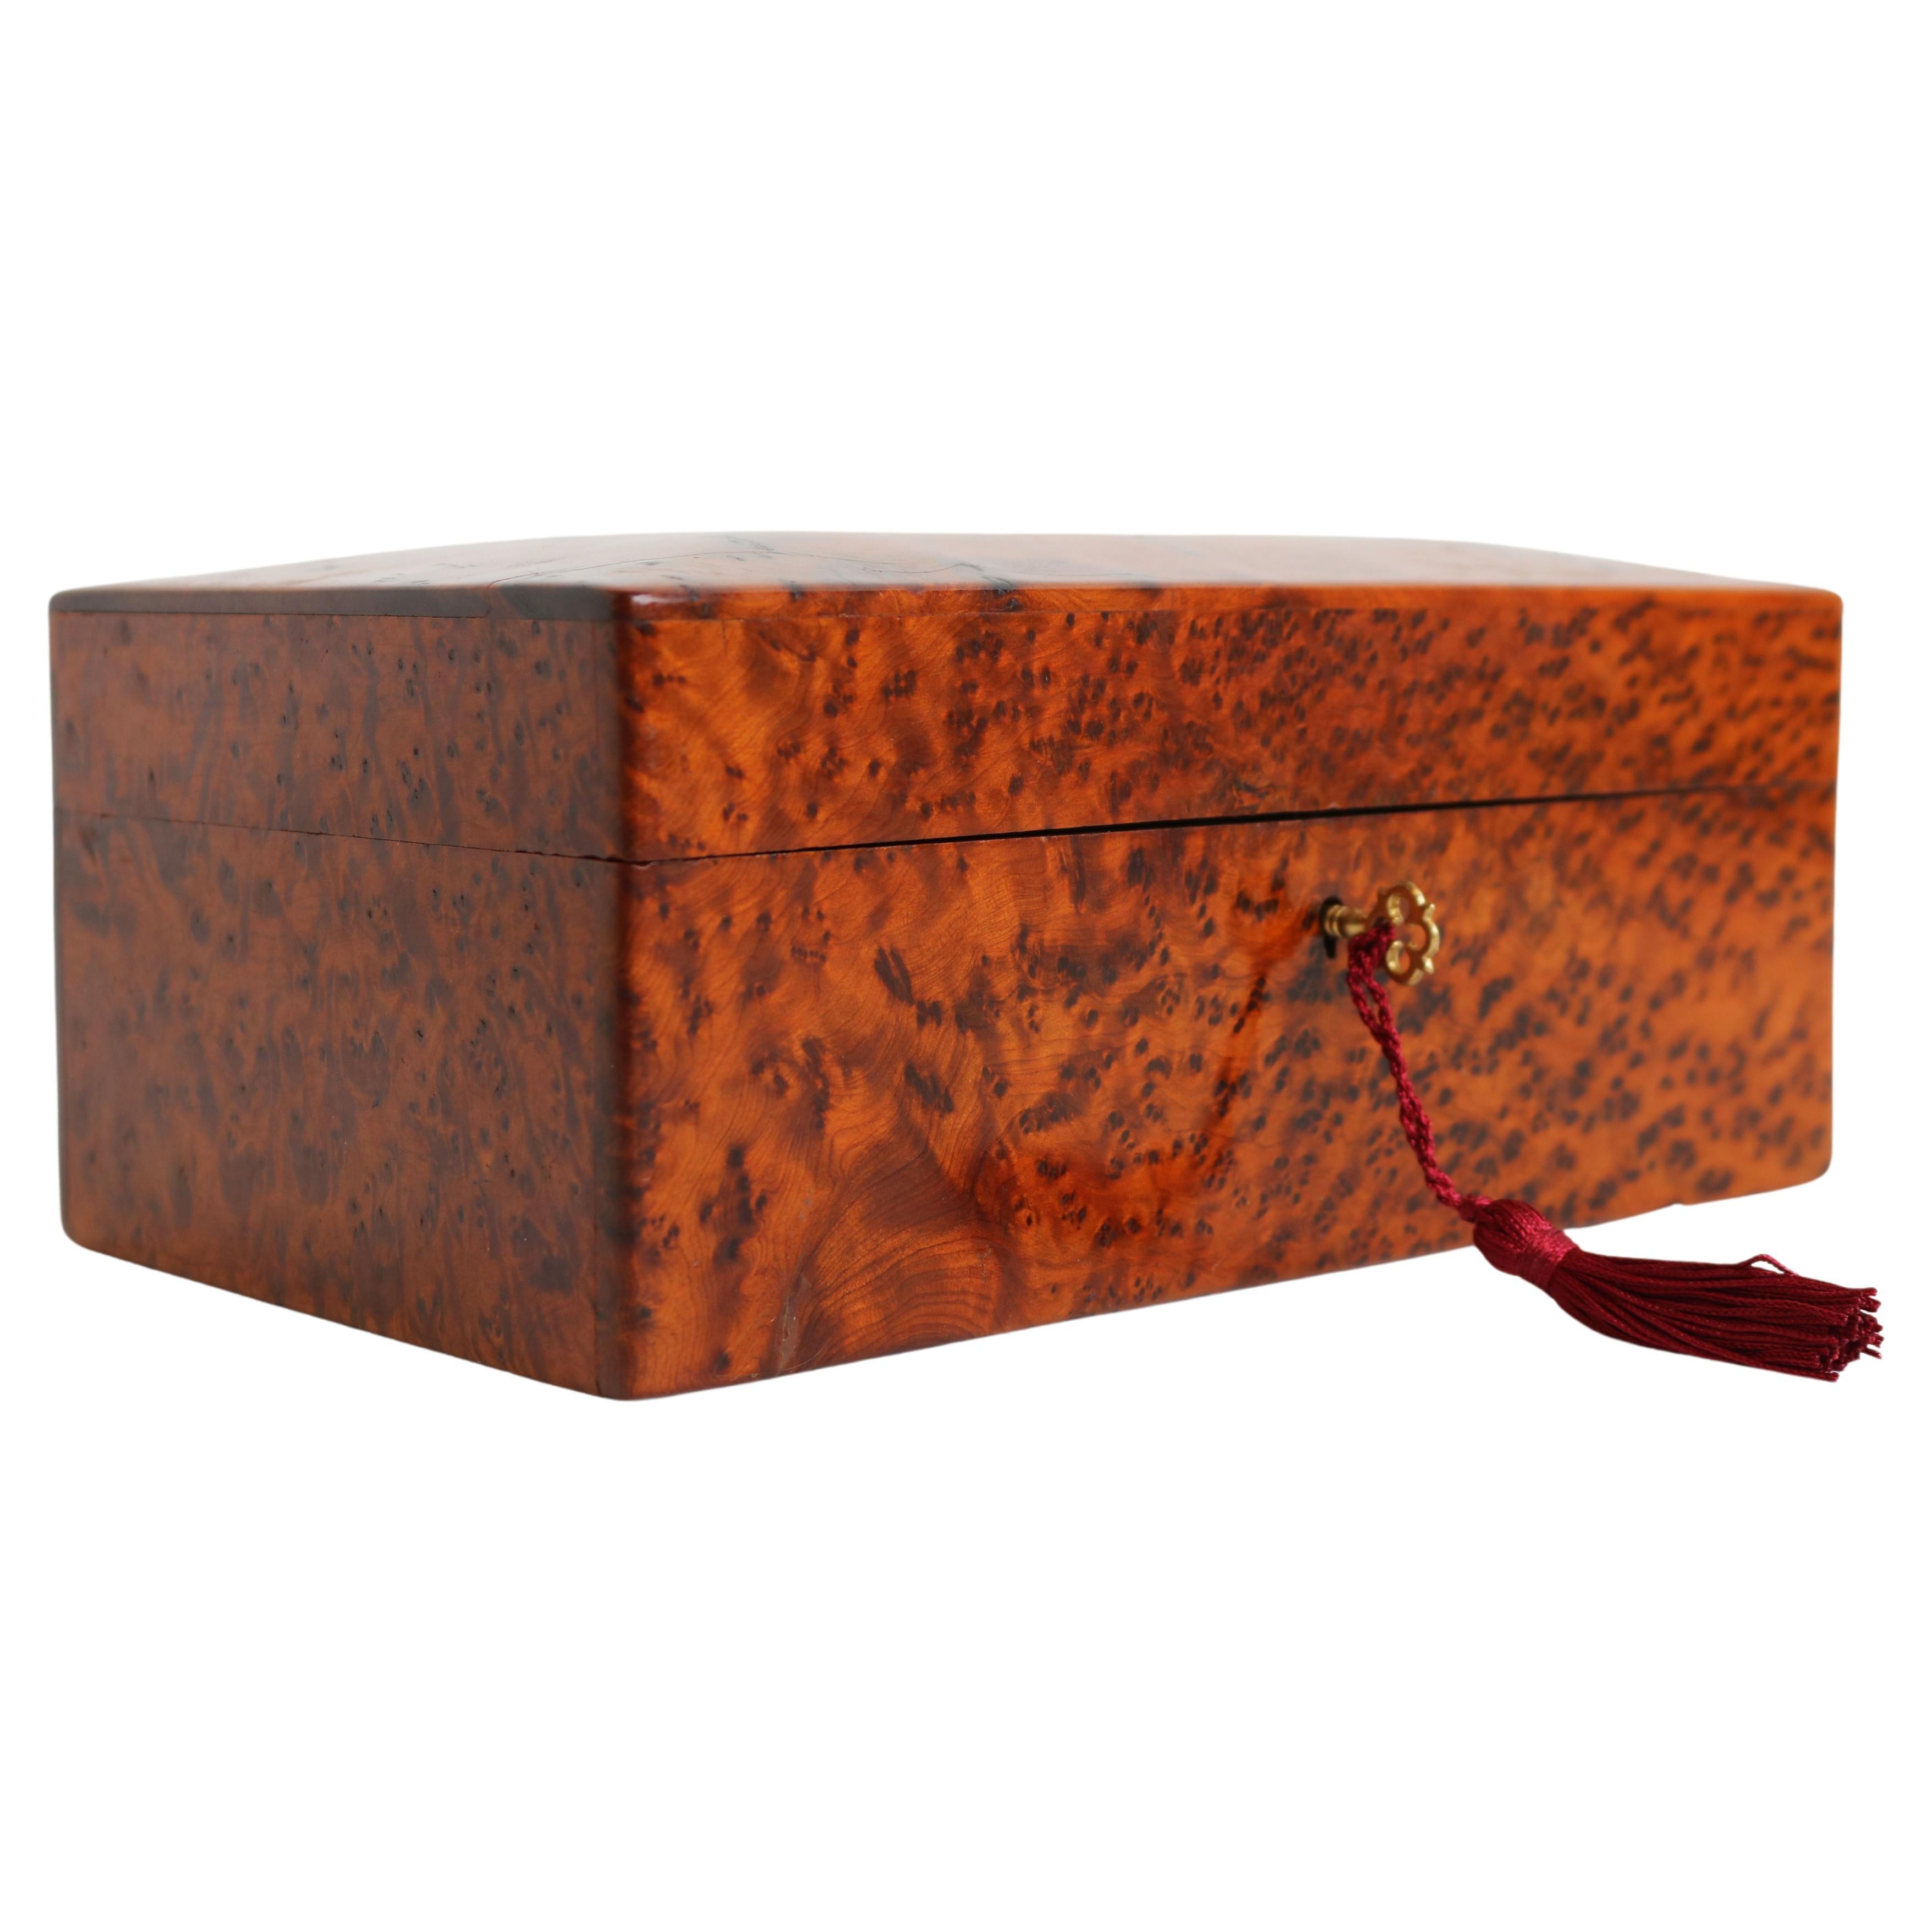 Stunning 19th Century French Antique Napoleon III Jewelry Box in Burl Wood Chest For Sale